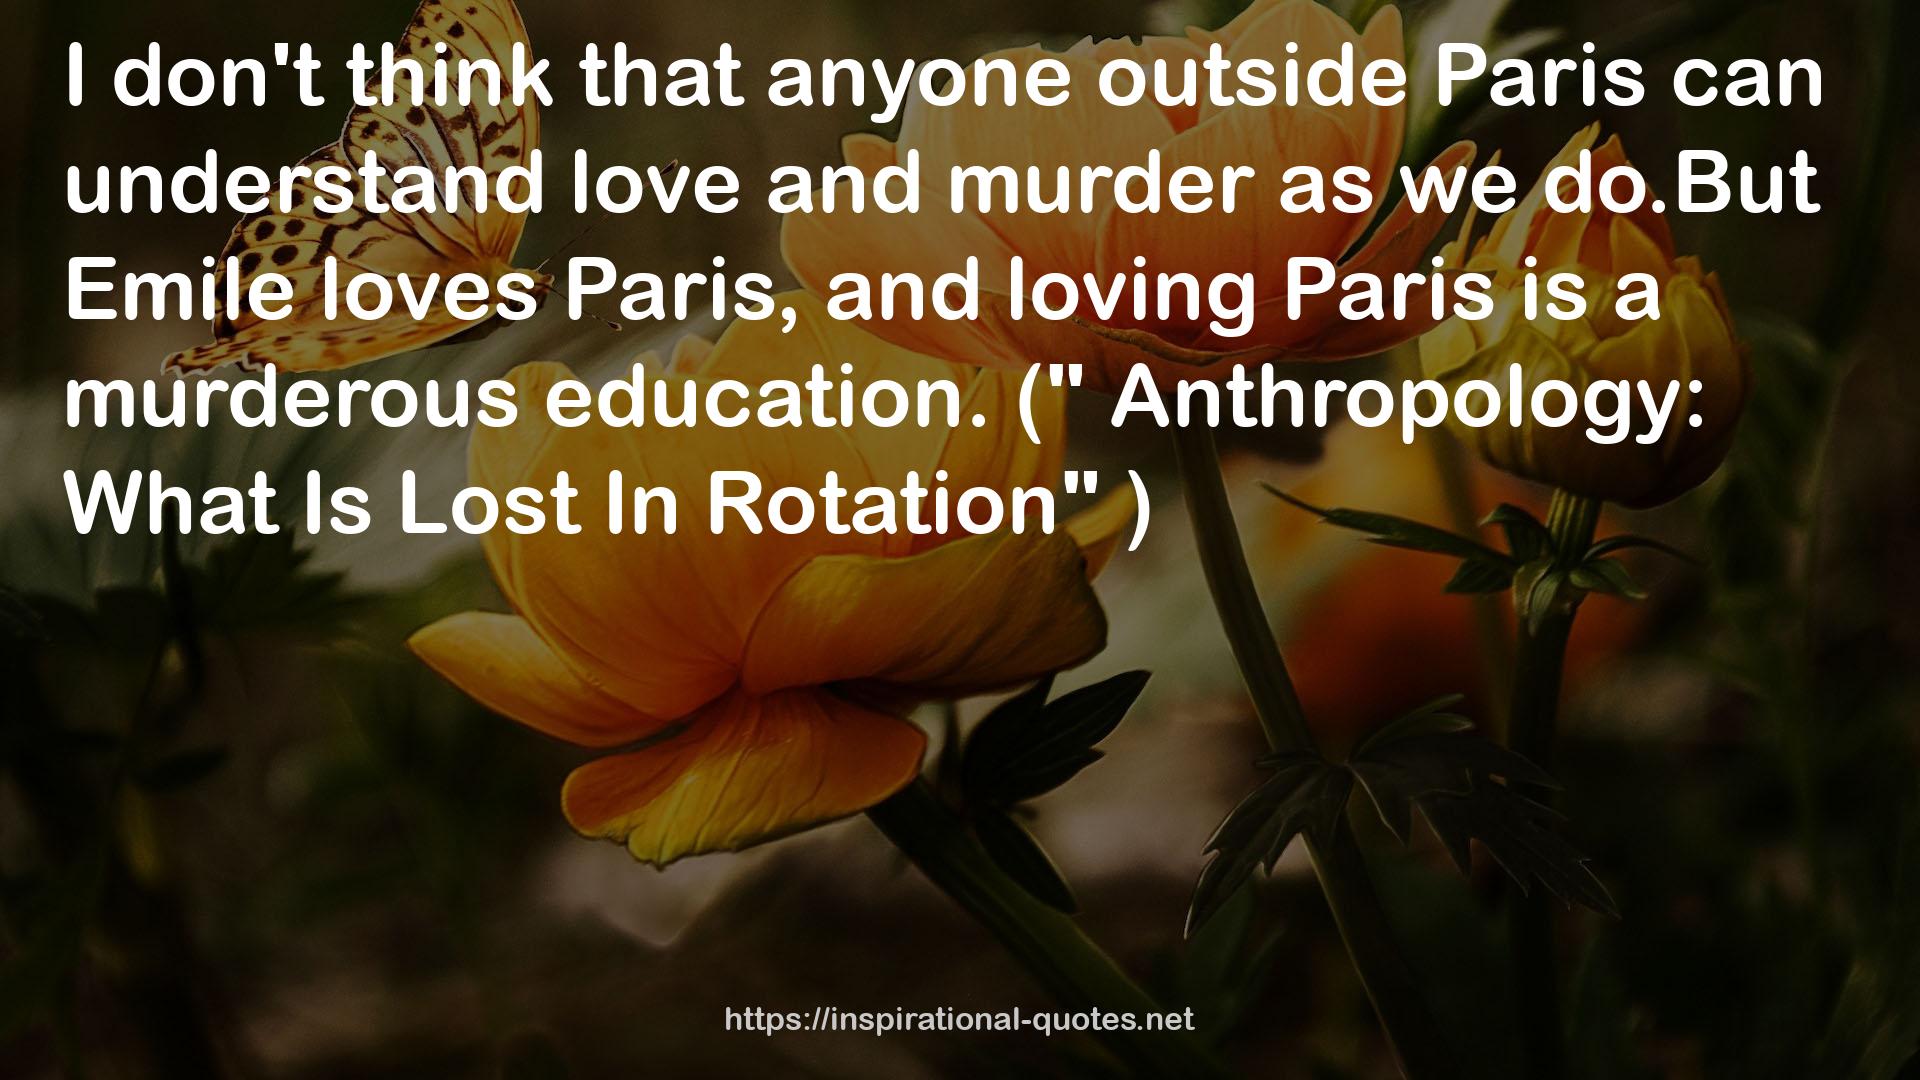 Anthropology:  QUOTES